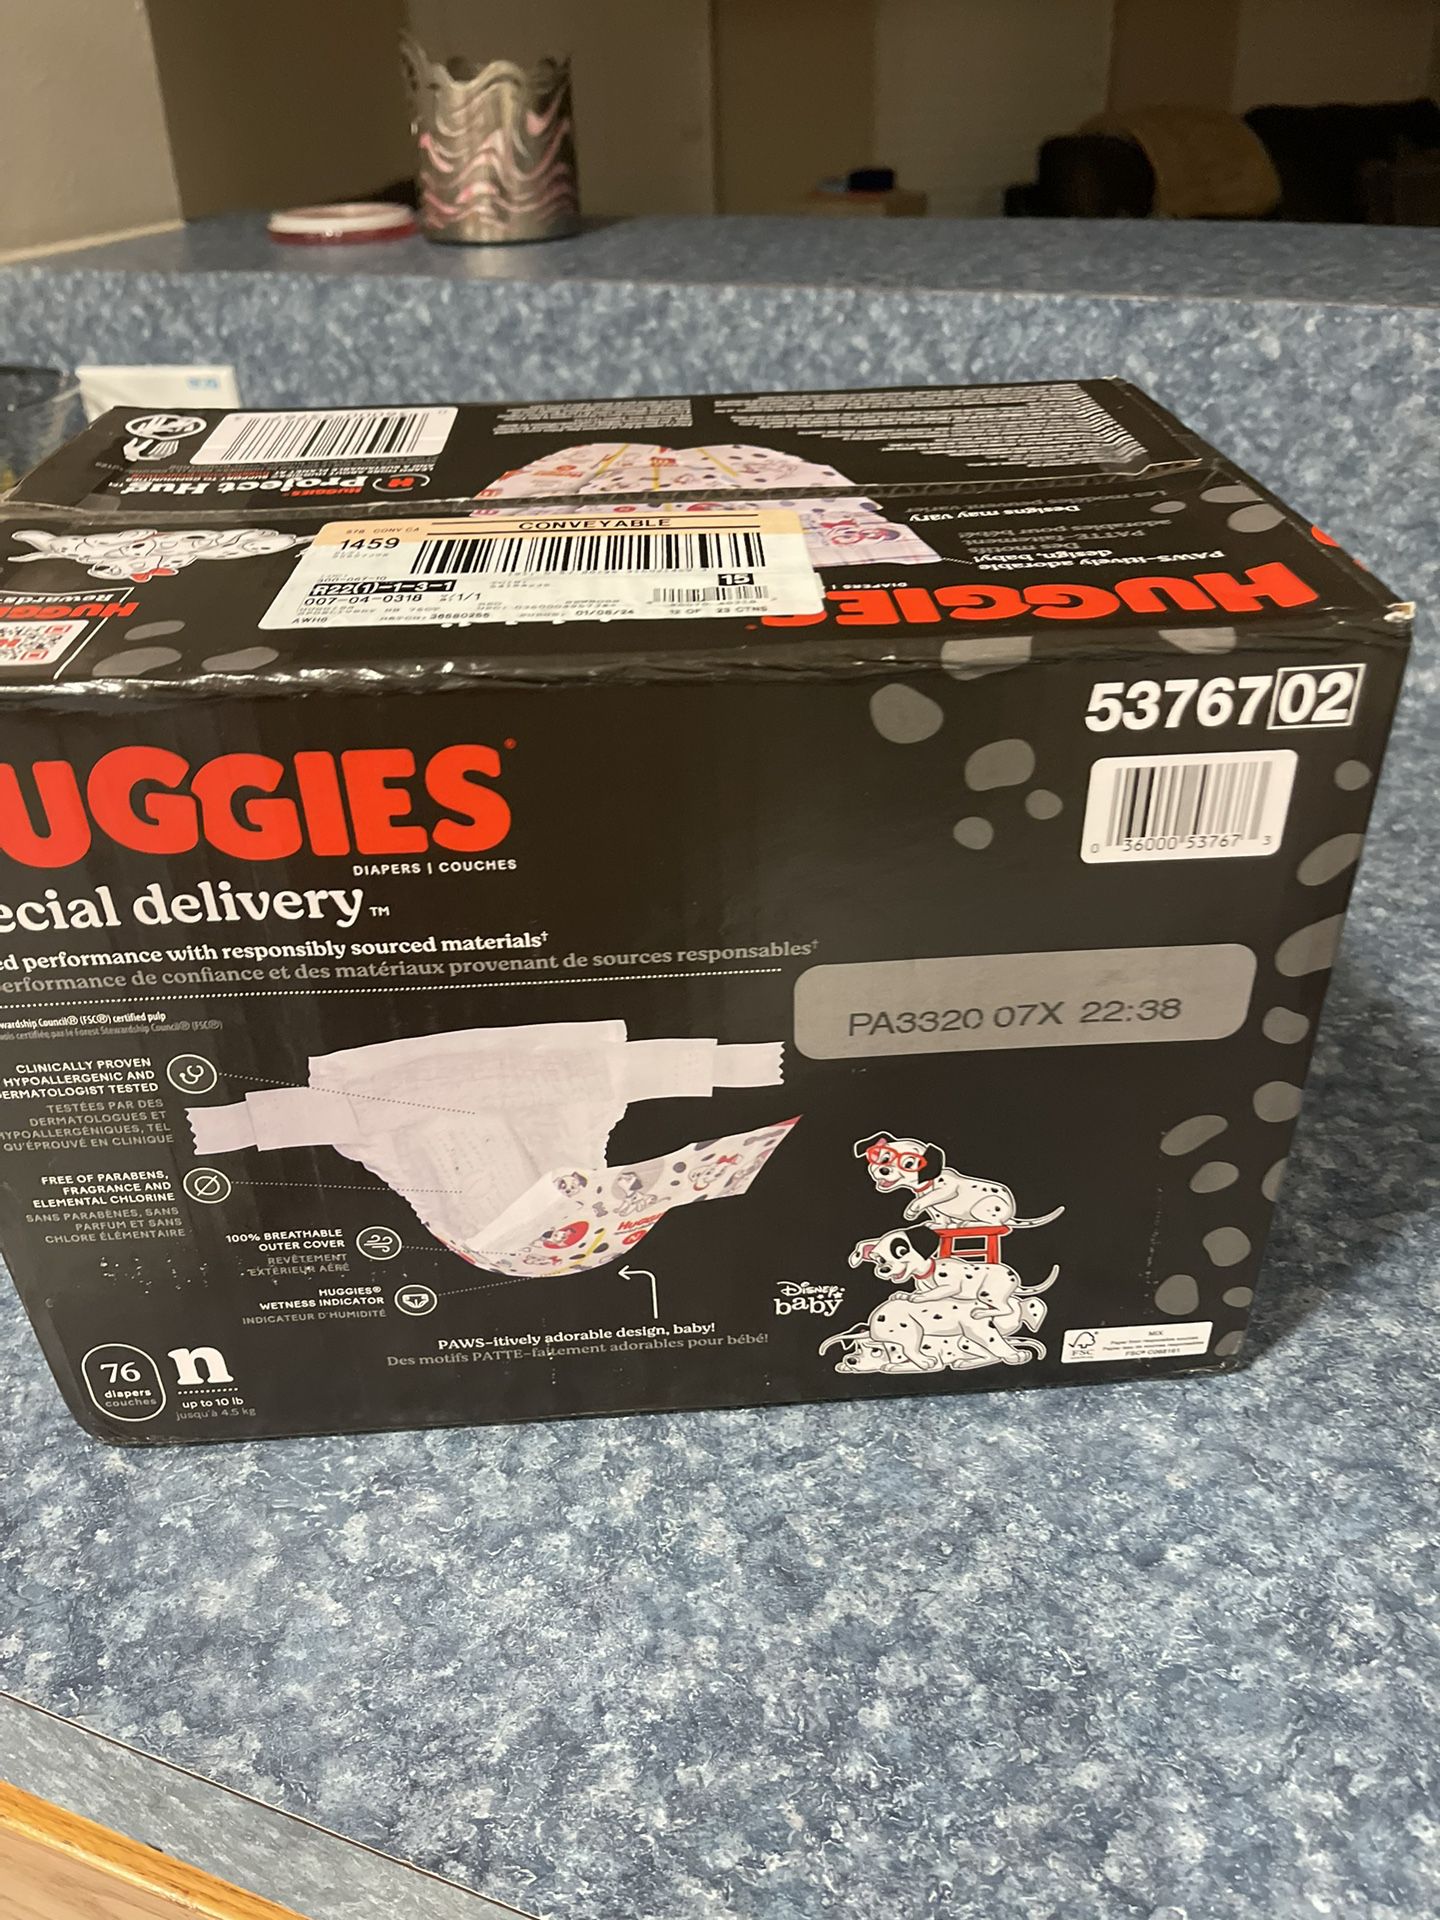 BRAND NEW UNOPENED HUGGIES SPECIAL DELIVERY (RARE) DISCOUNTINUED) NEWBORN (76) DIAPERS